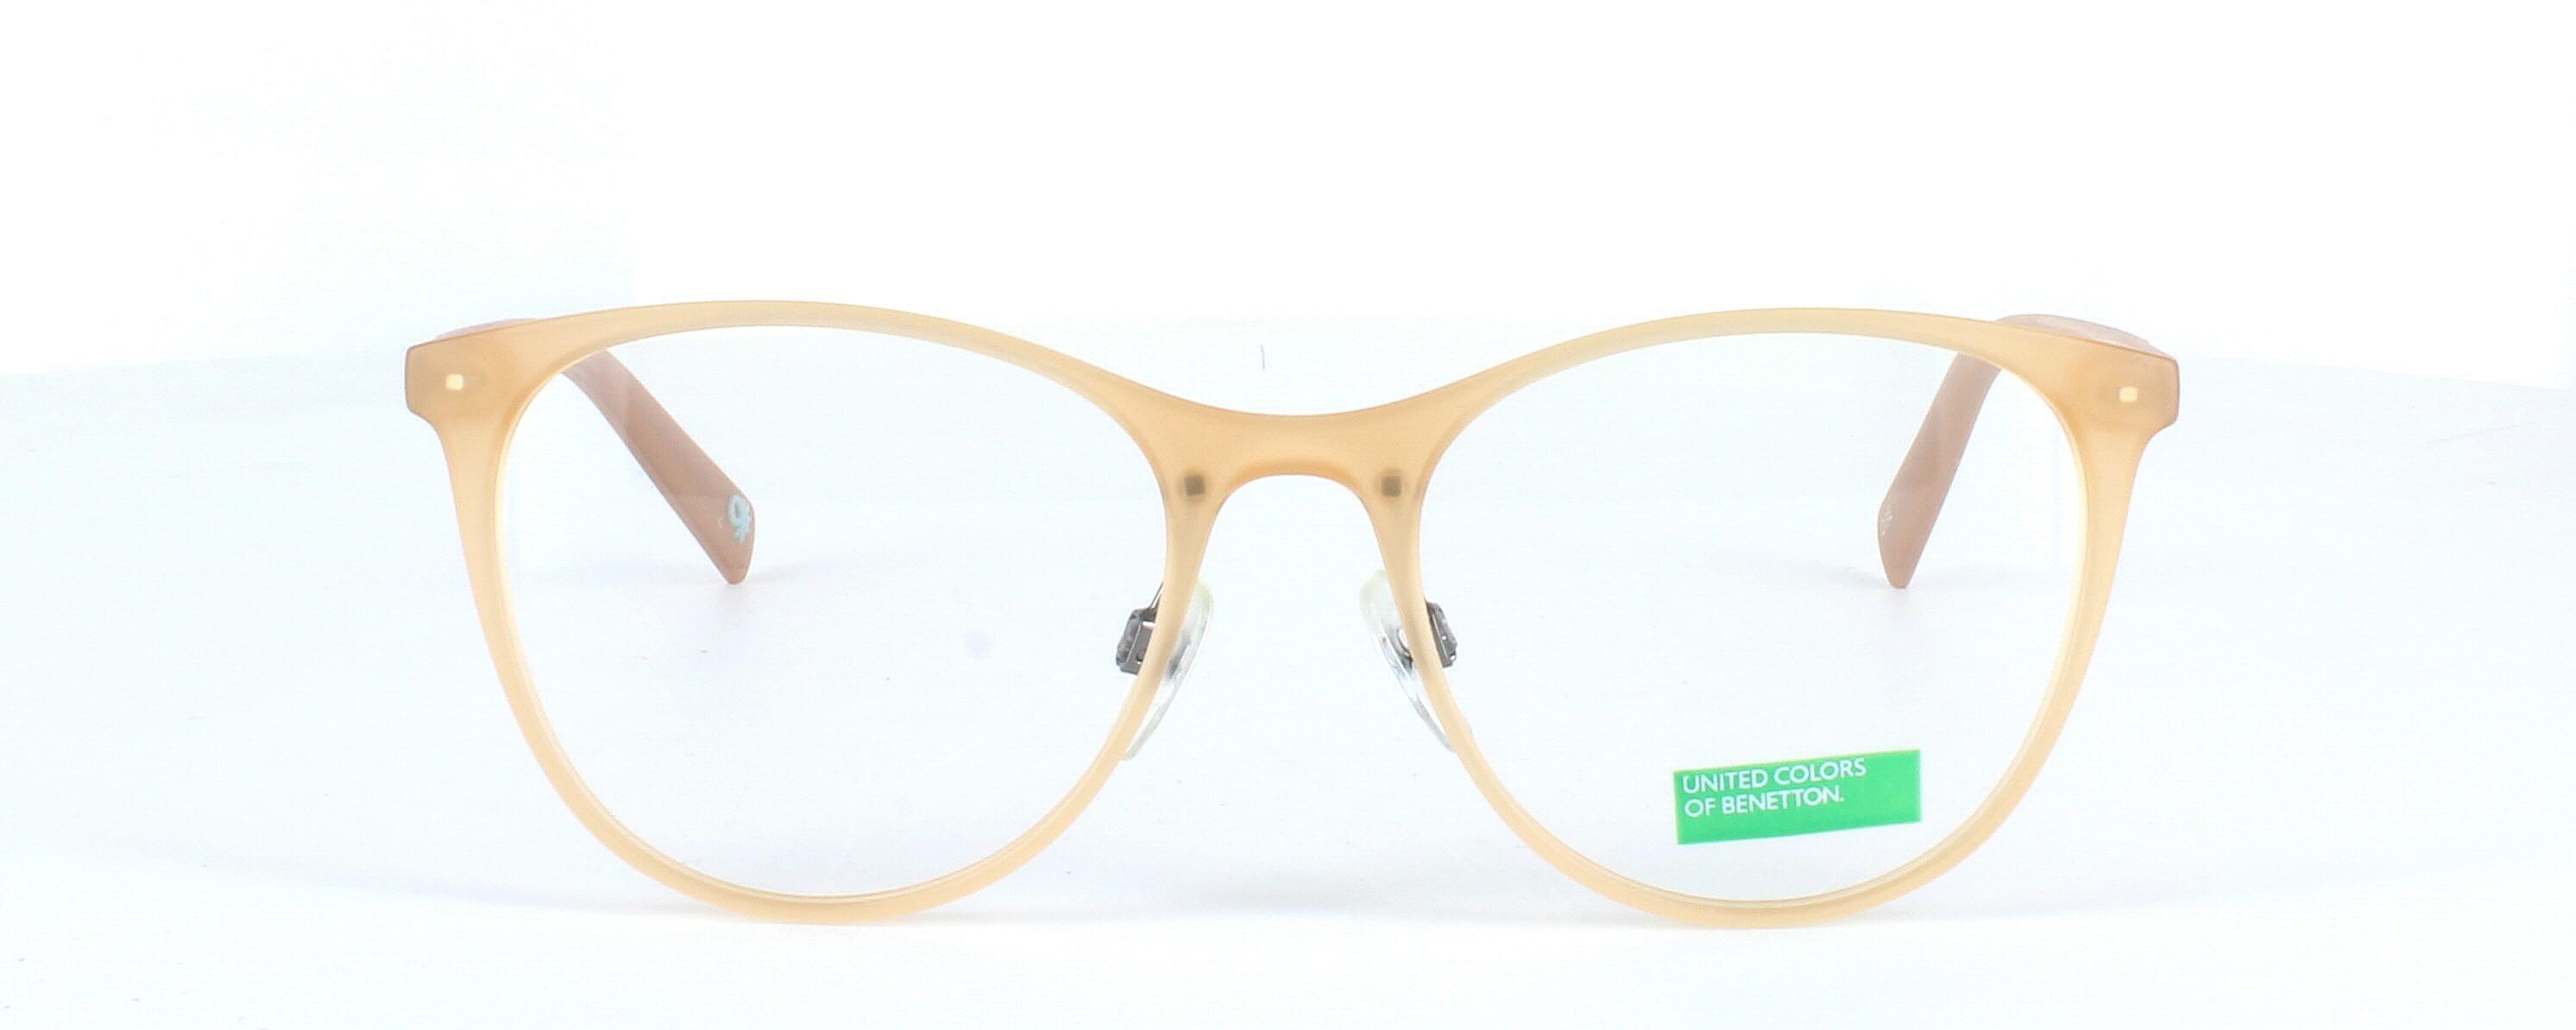 Benetton BEO1012 122 - Women's TR90 lightweight glasses frame in crystal beige - image view 2